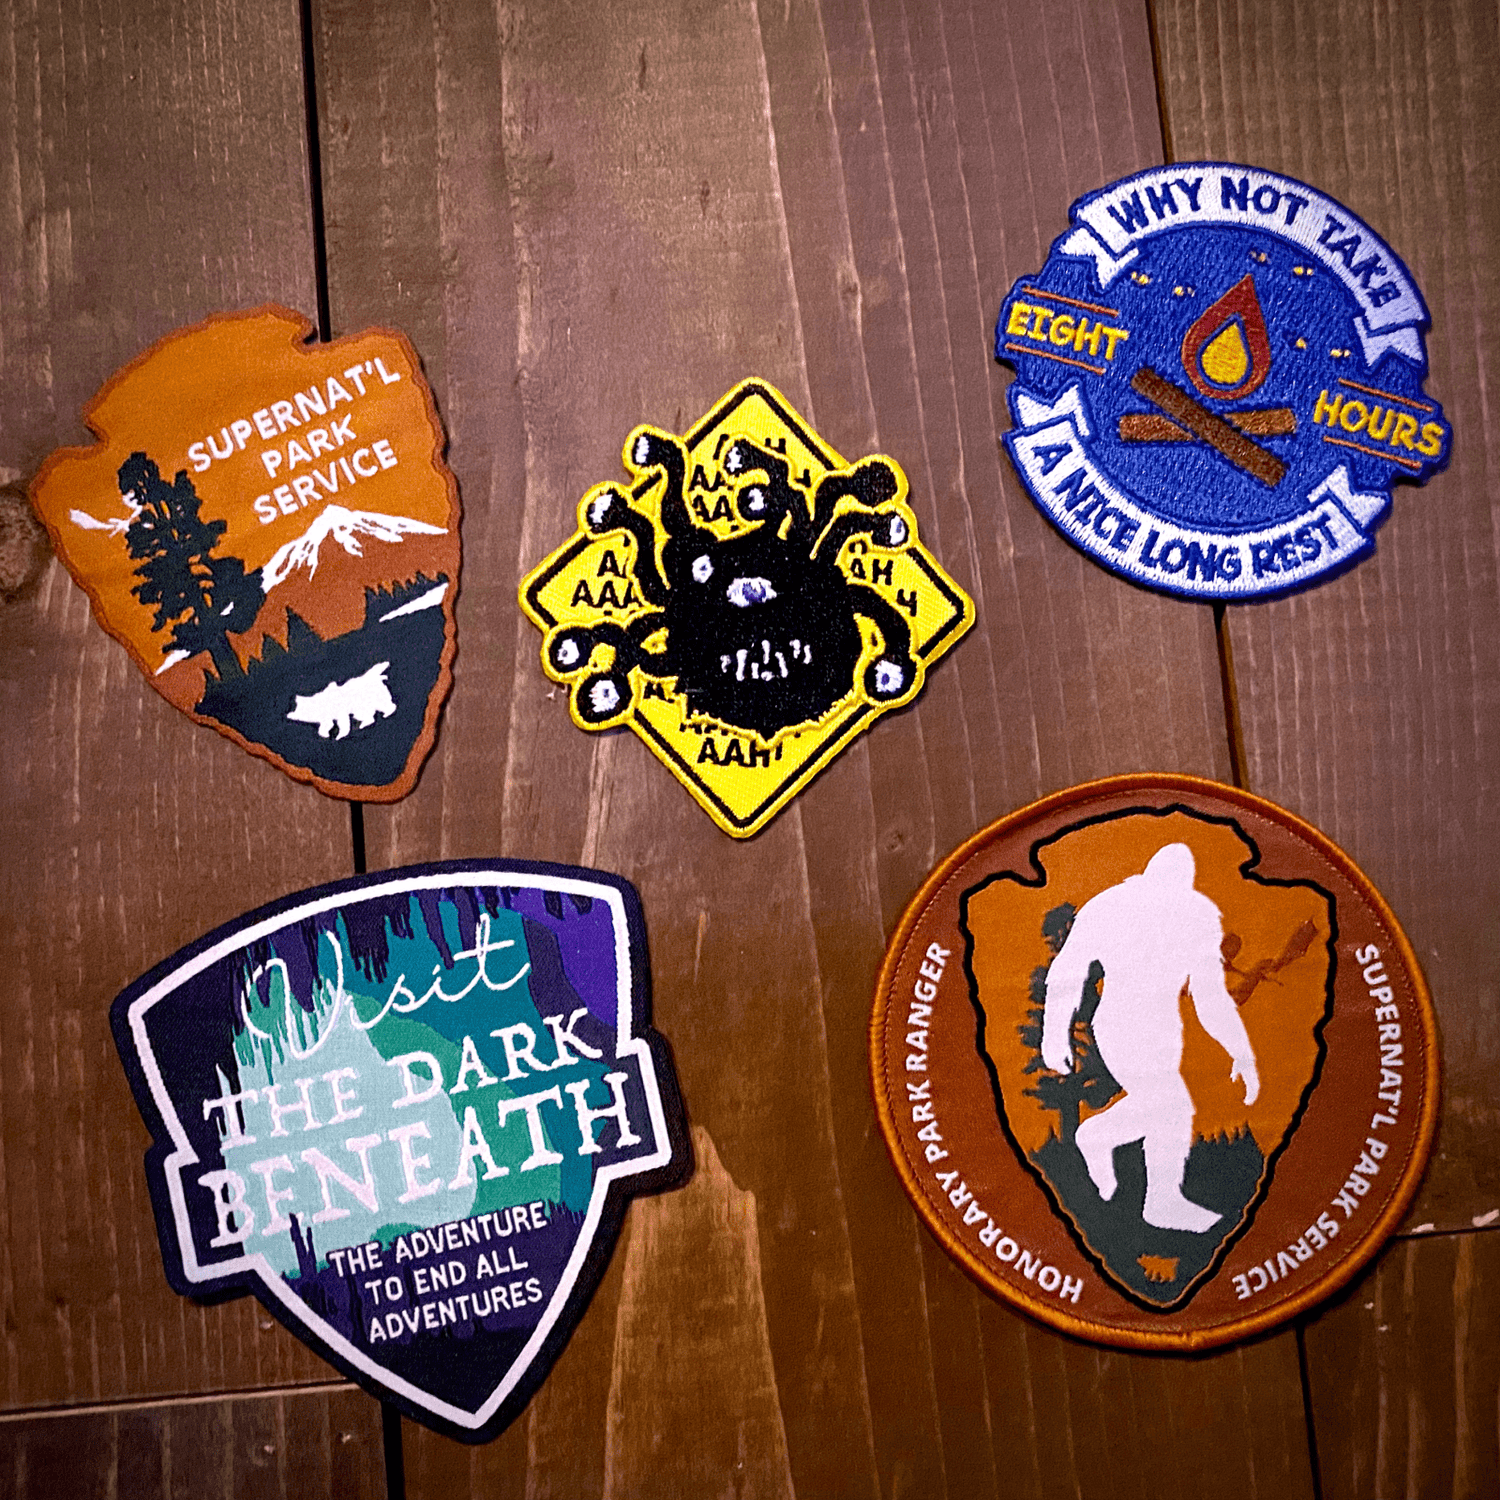 Supernat'l Park Service Patches (Updated Set of 5) - The Fourth Place